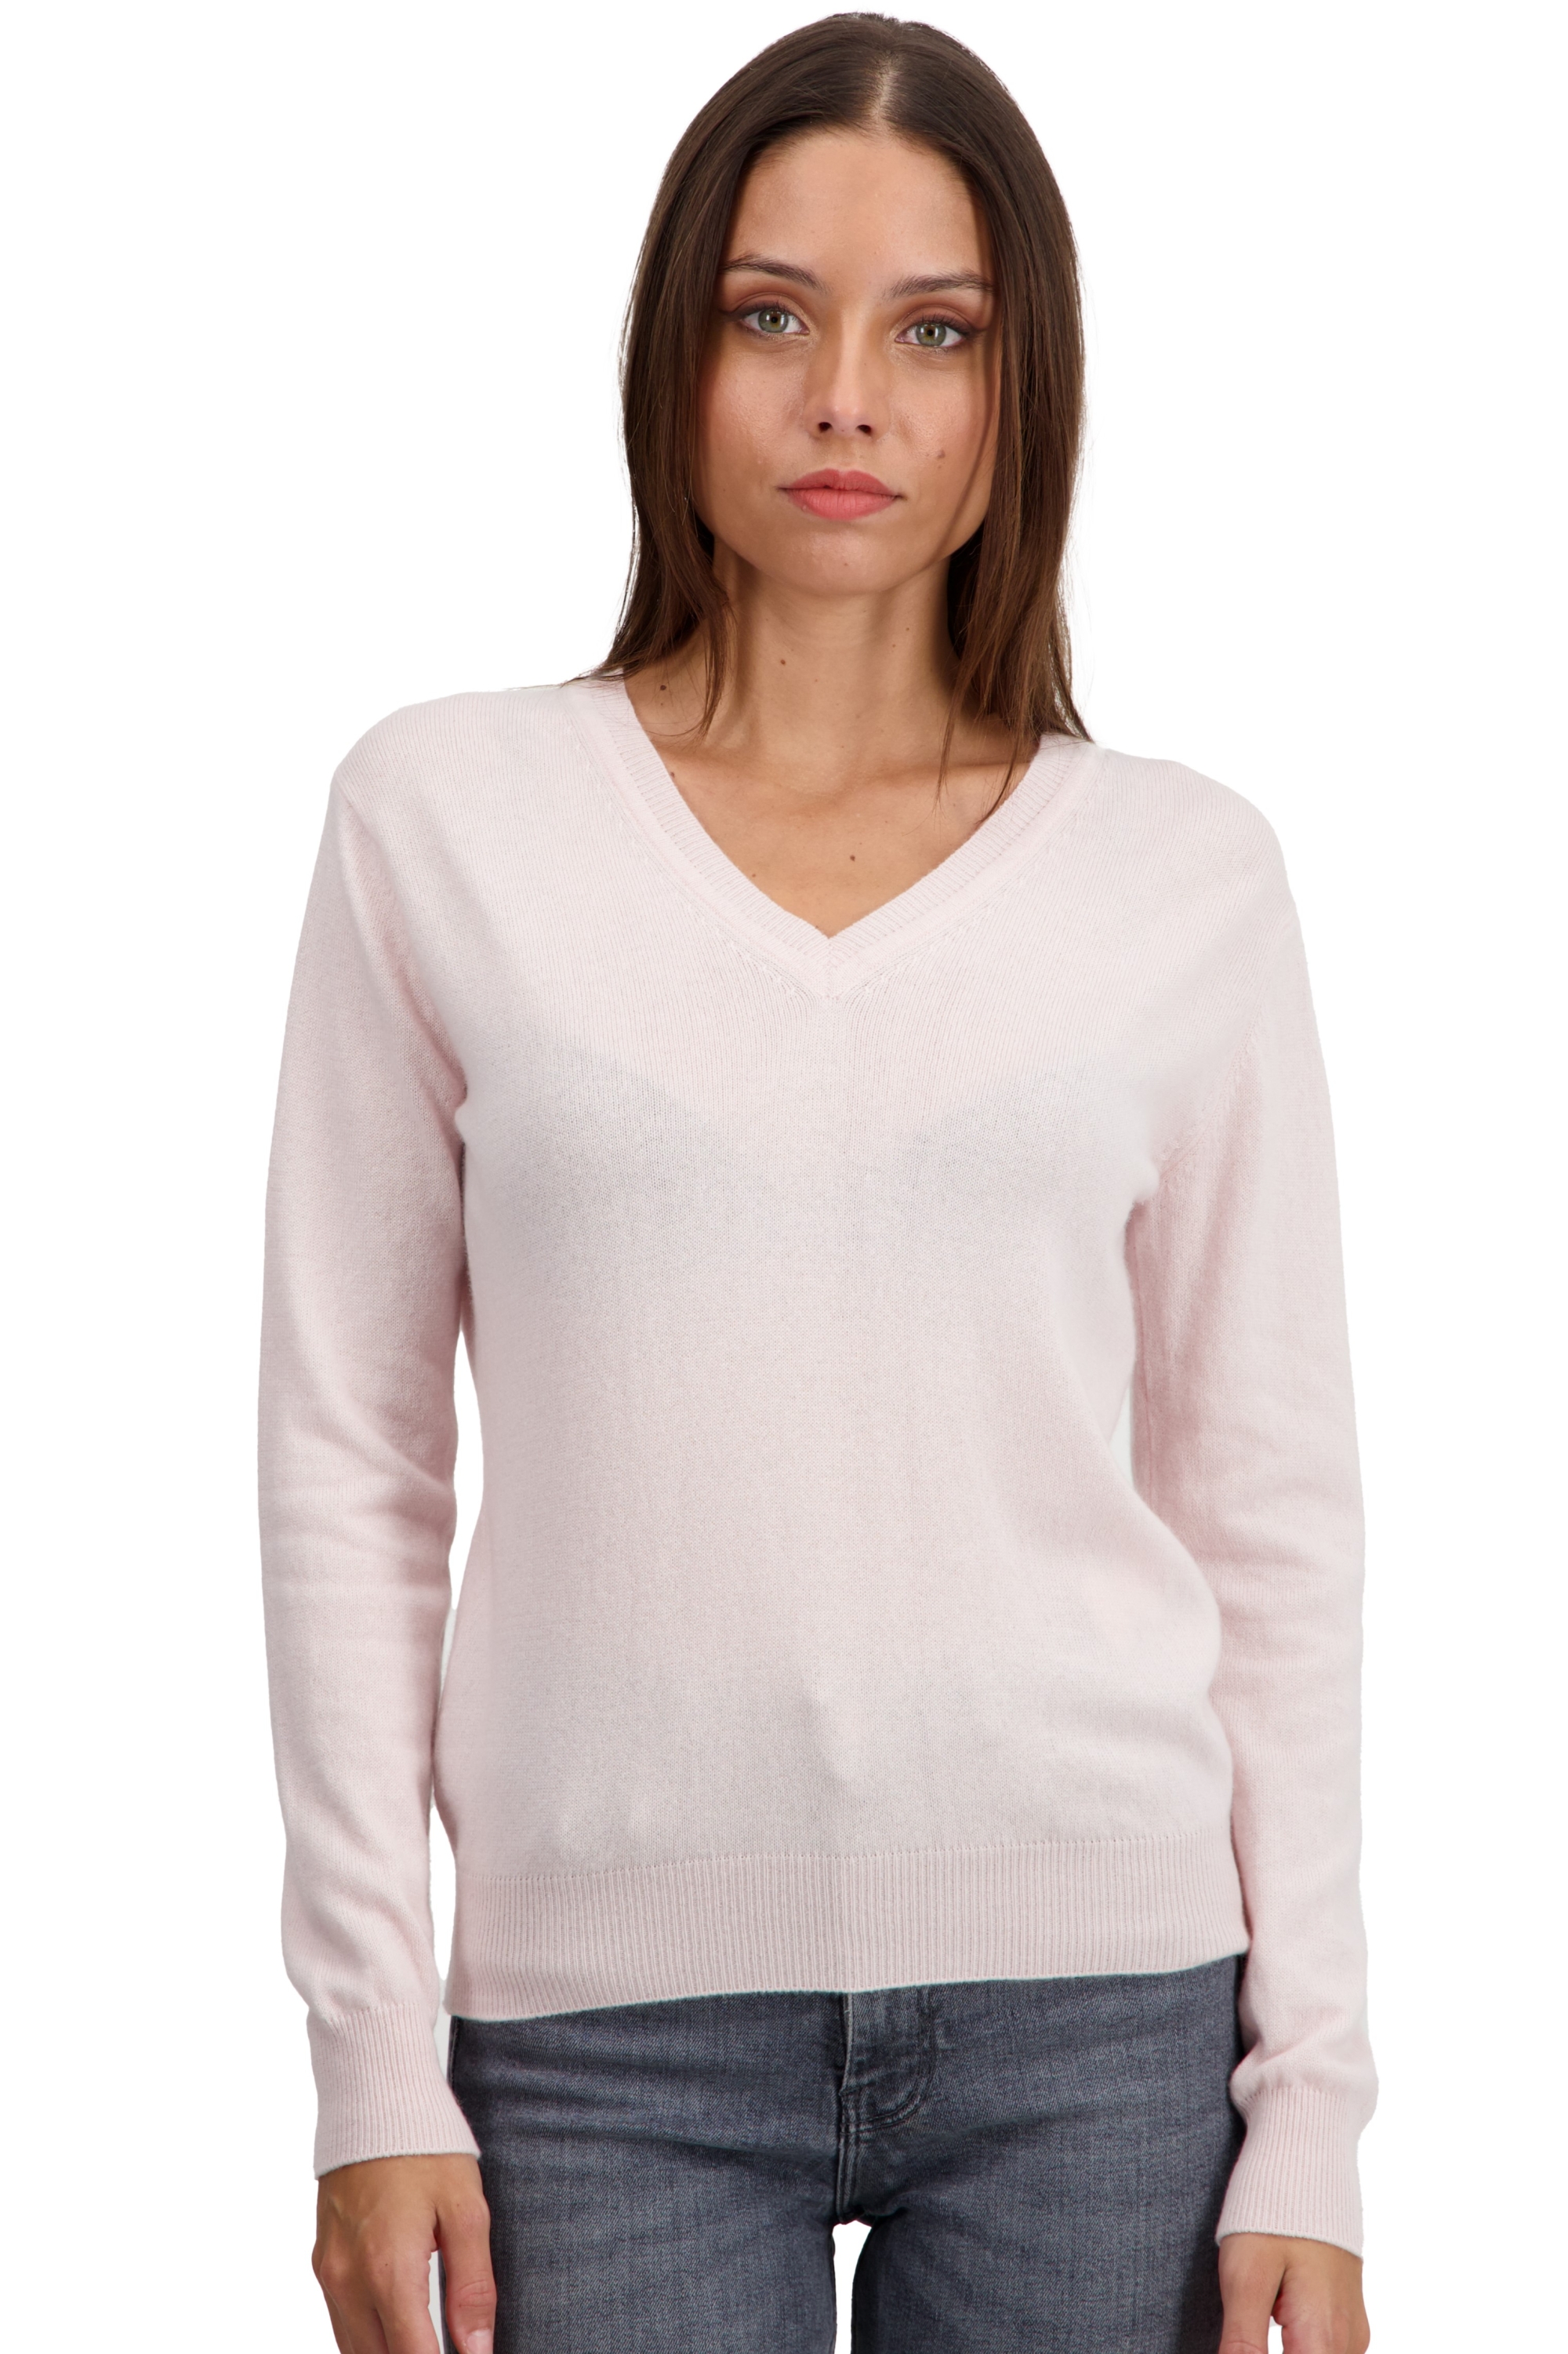 Cachemire pull femme collection printemps ete faustine rose pale xs